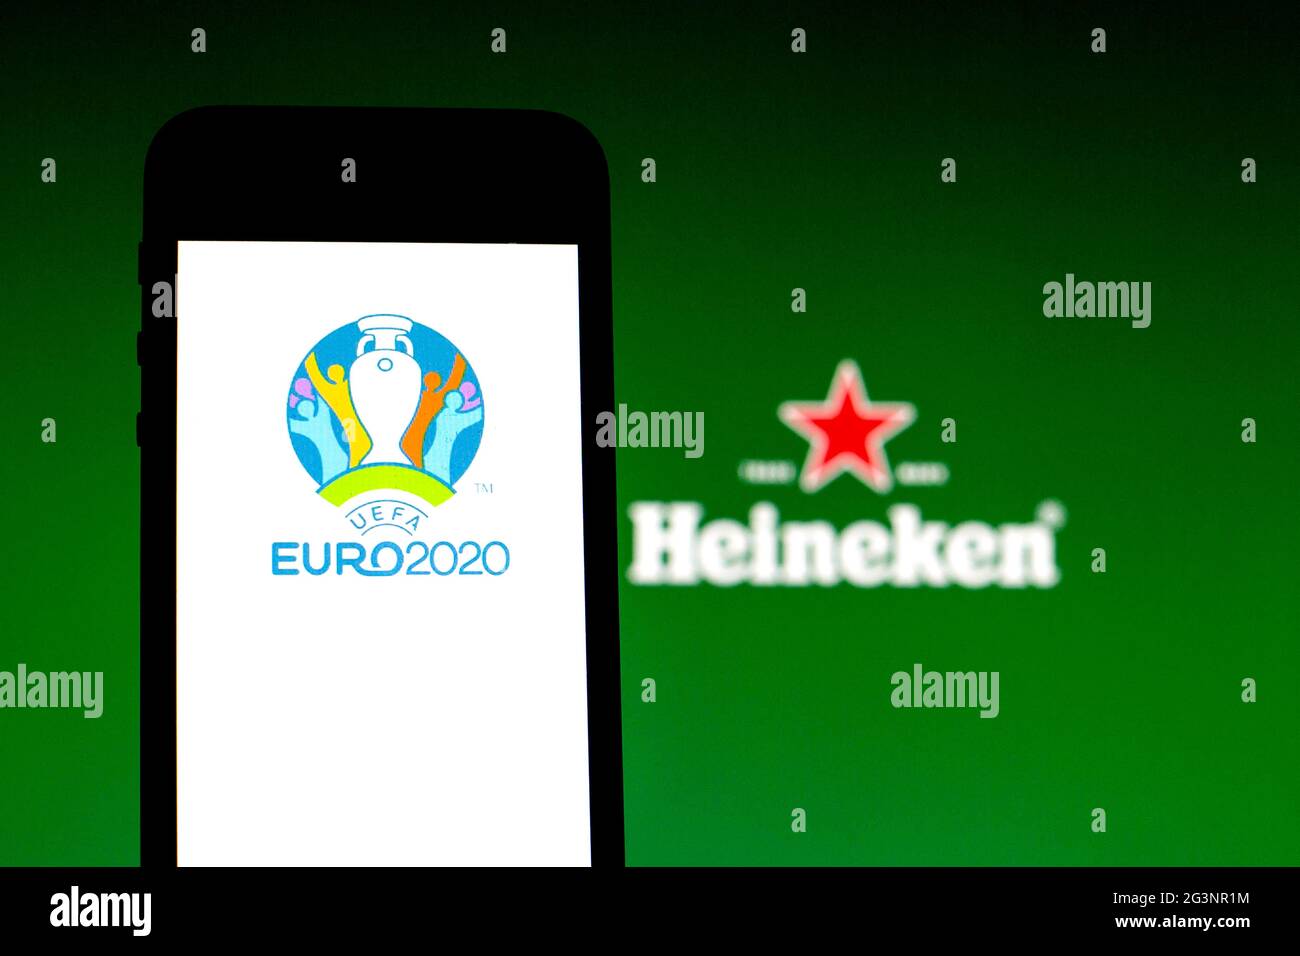 June 15, 2021, Spain: In this photo illustration a UEFA Euro 2020 logo seen displayed on a smartphone with a Heineken logo in the background. (Credit Image: © Thiago Prudencio/SOPA Images via ZUMA Wire) Stock Photo